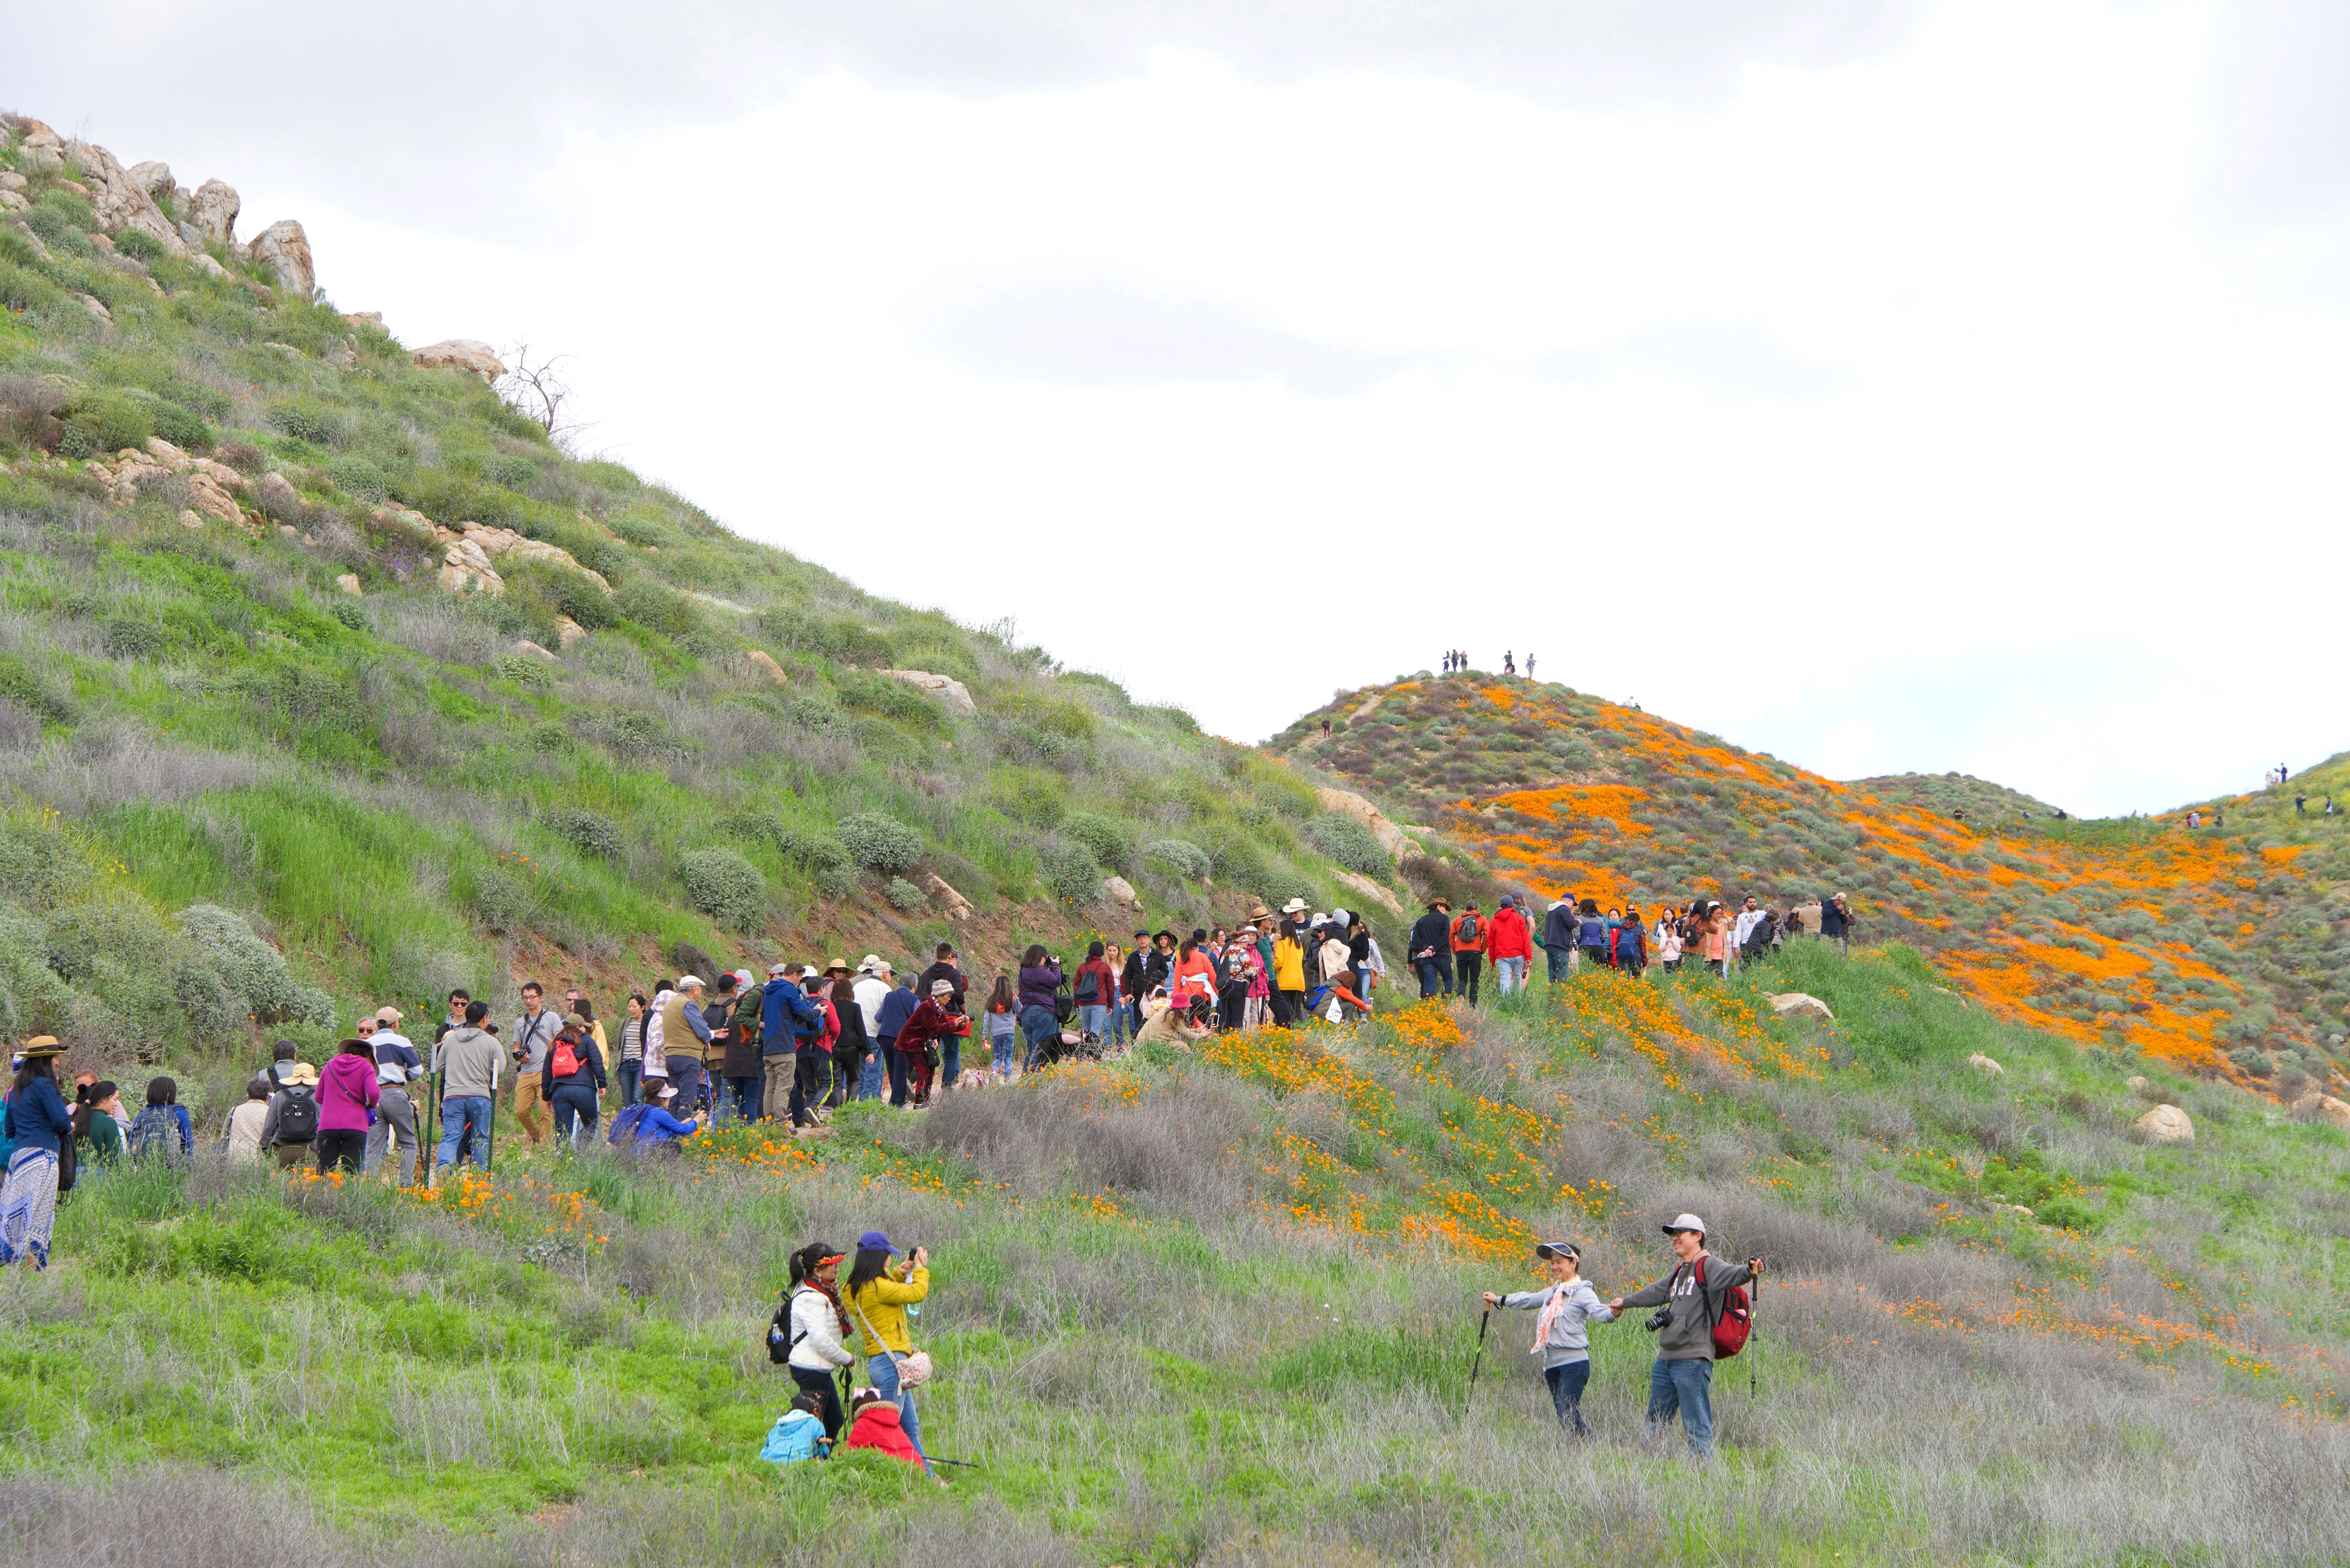 Thousands of people line the trails to view the orange explosion of wild poppy flowers along Walker Canyon in California